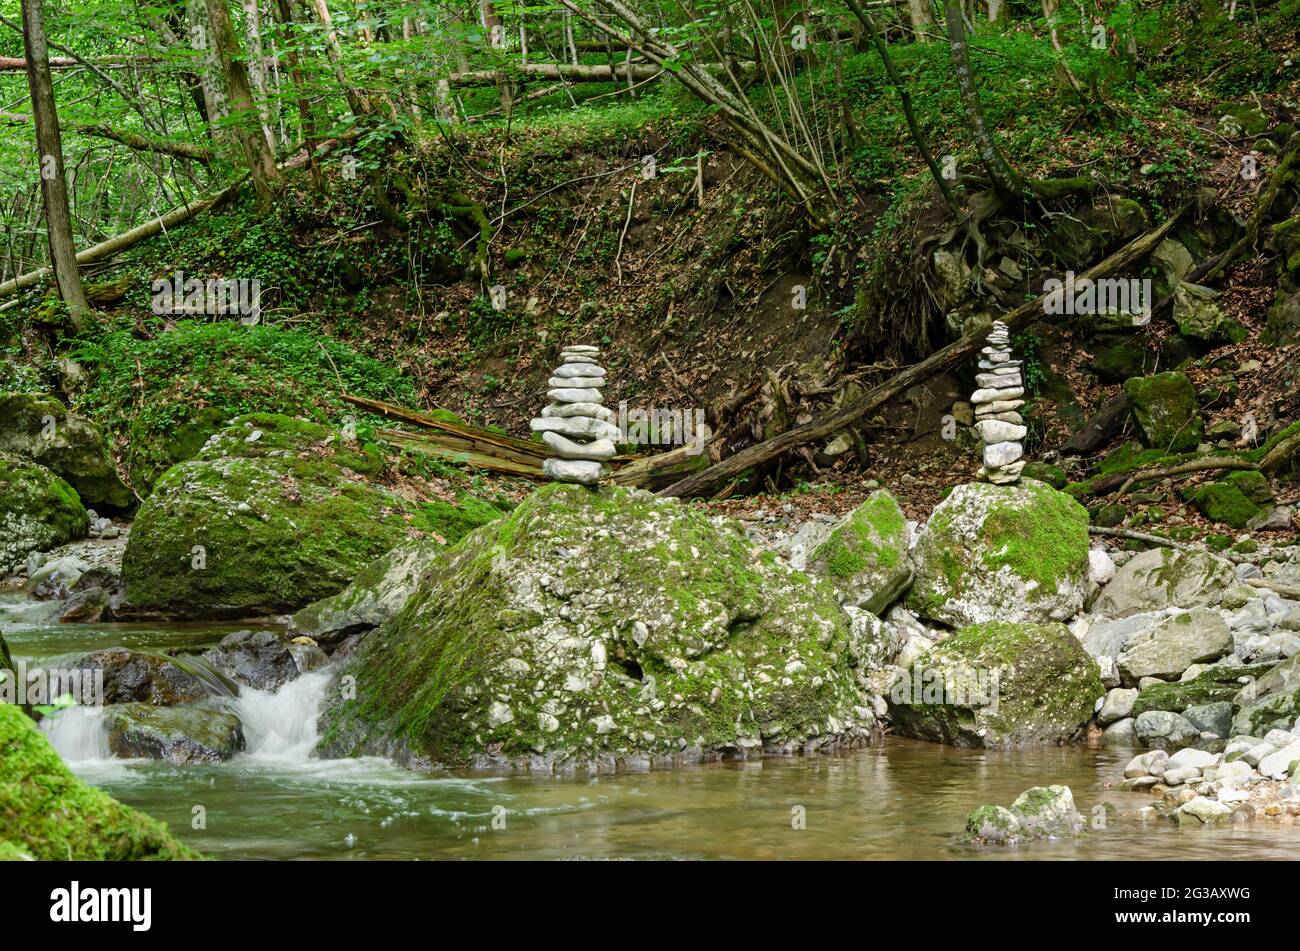 Two rock stacks in a streambed. Piles of stacked rocks, balancing on big rocks in a bed of a wild stream. Rocks laid flat upon each other. Stock Photo